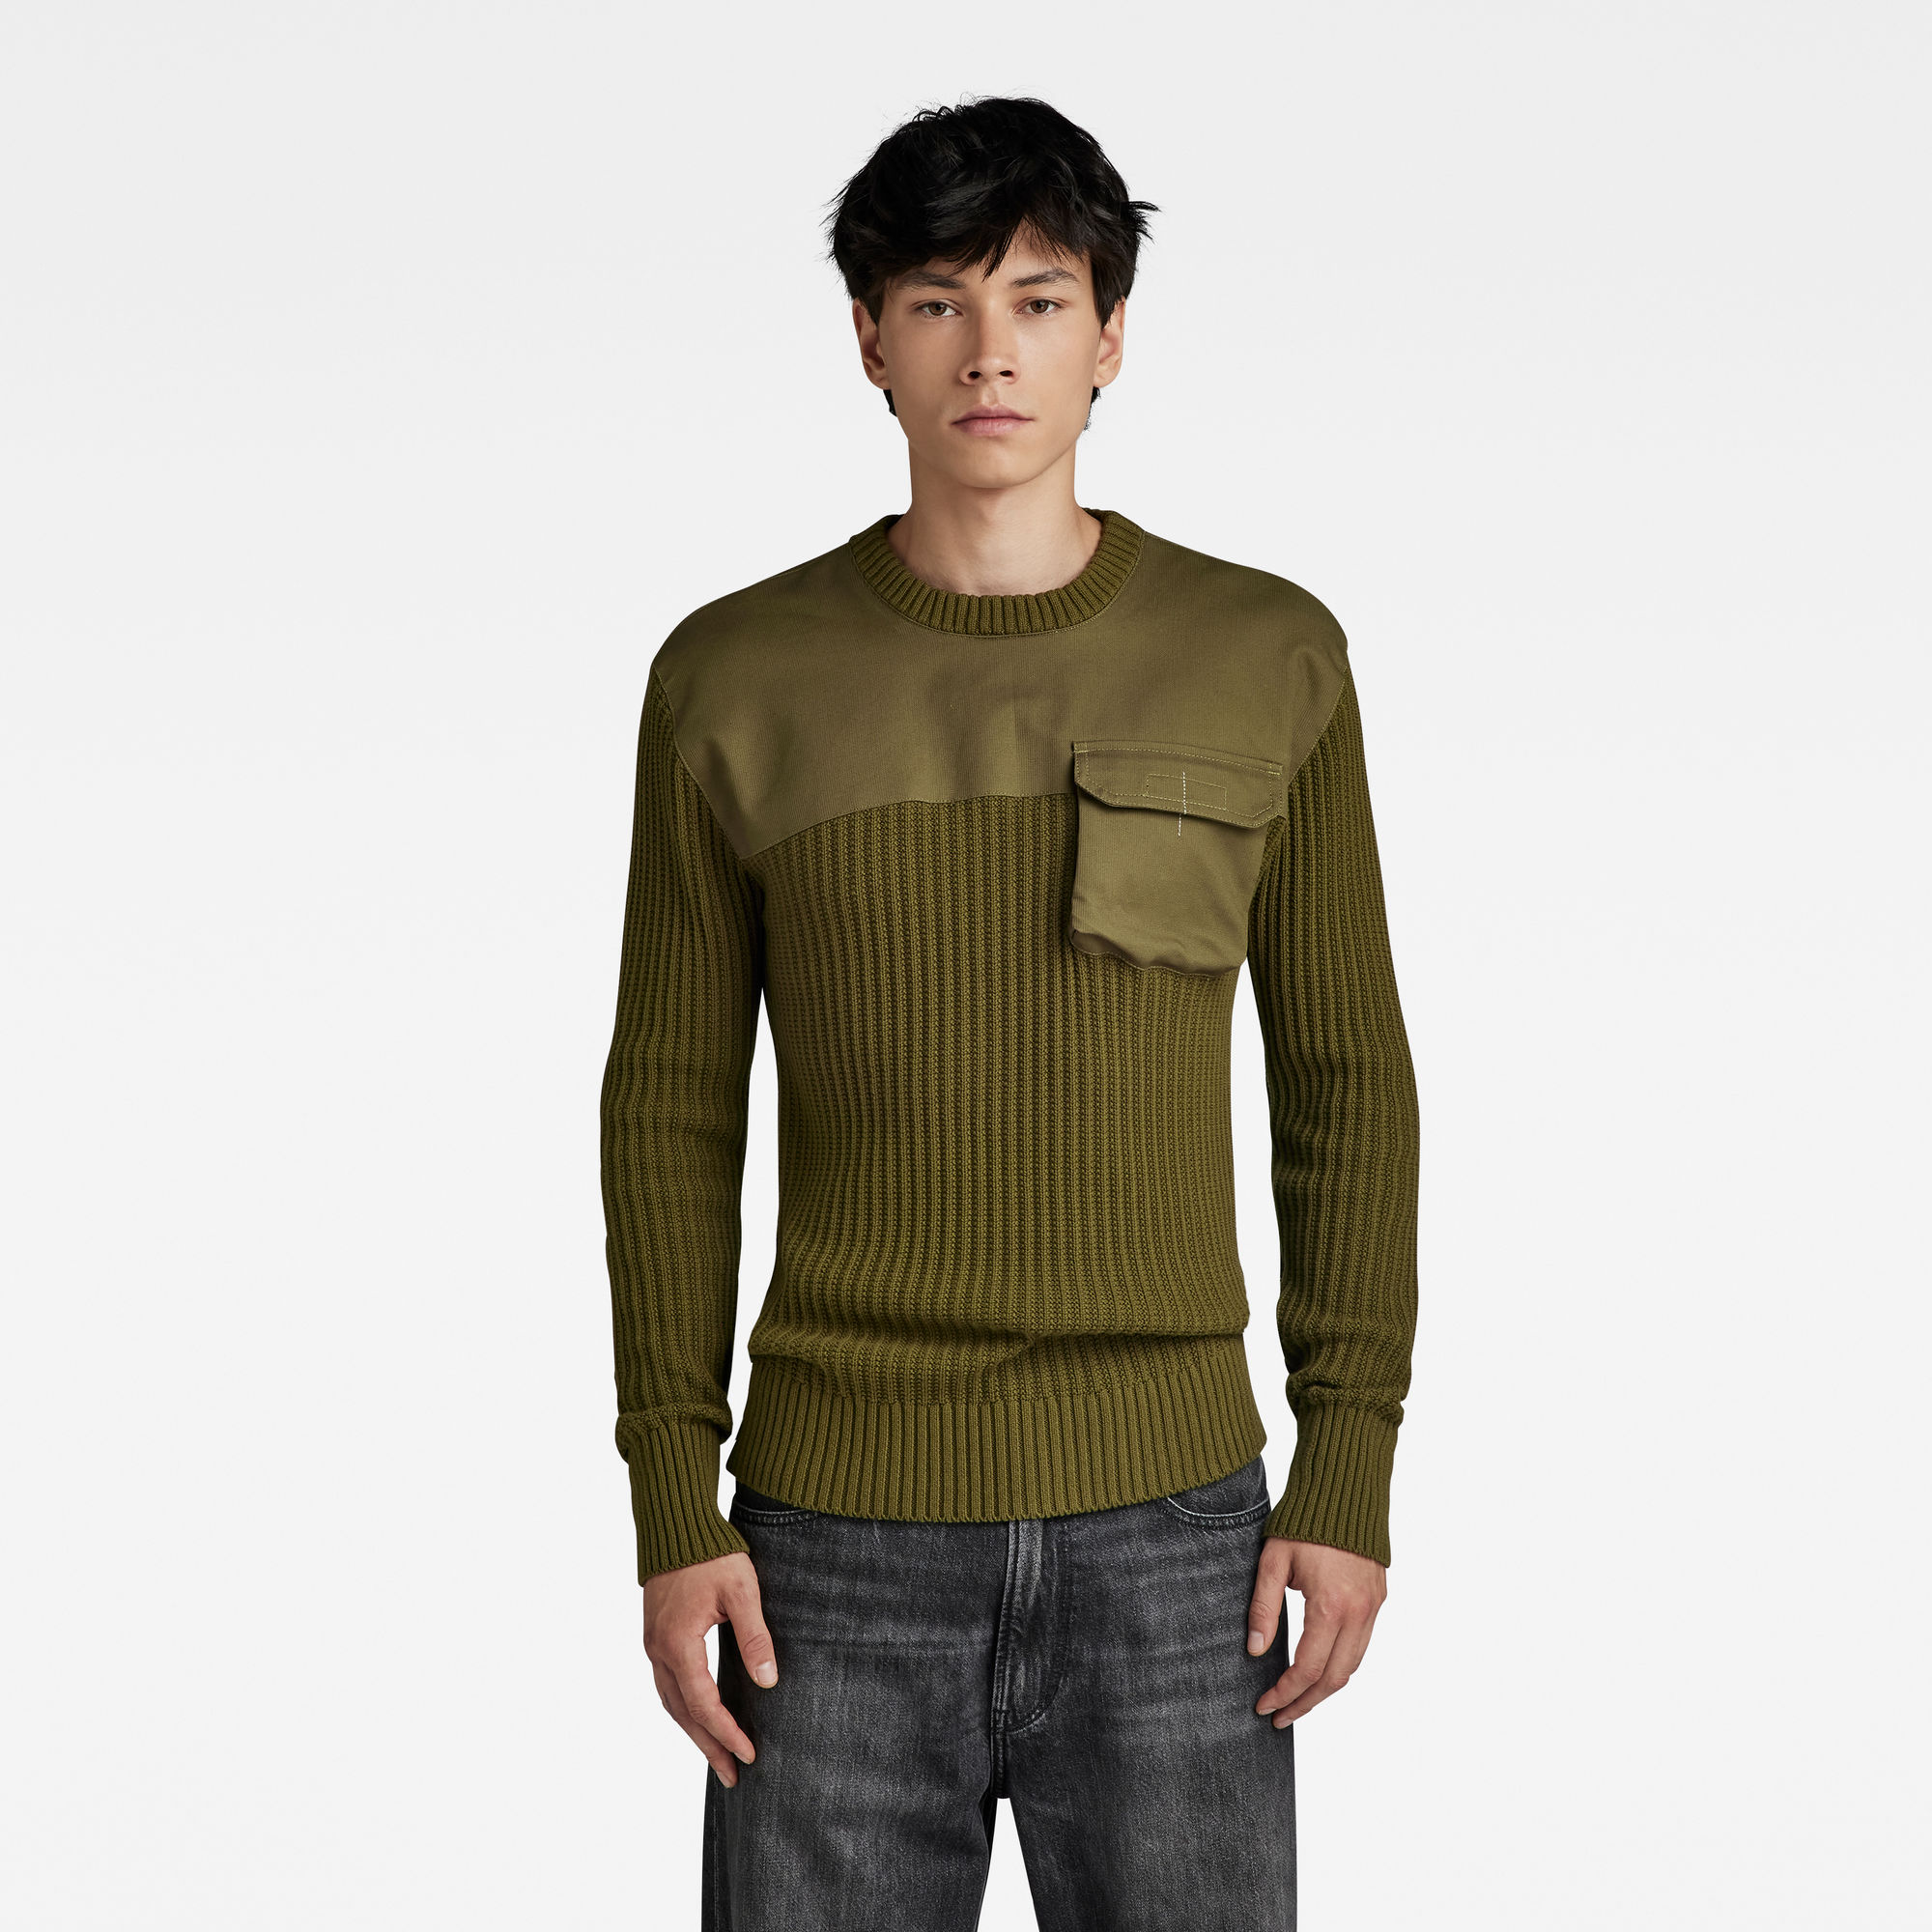 

Army Knitted Sweater - Green - Men